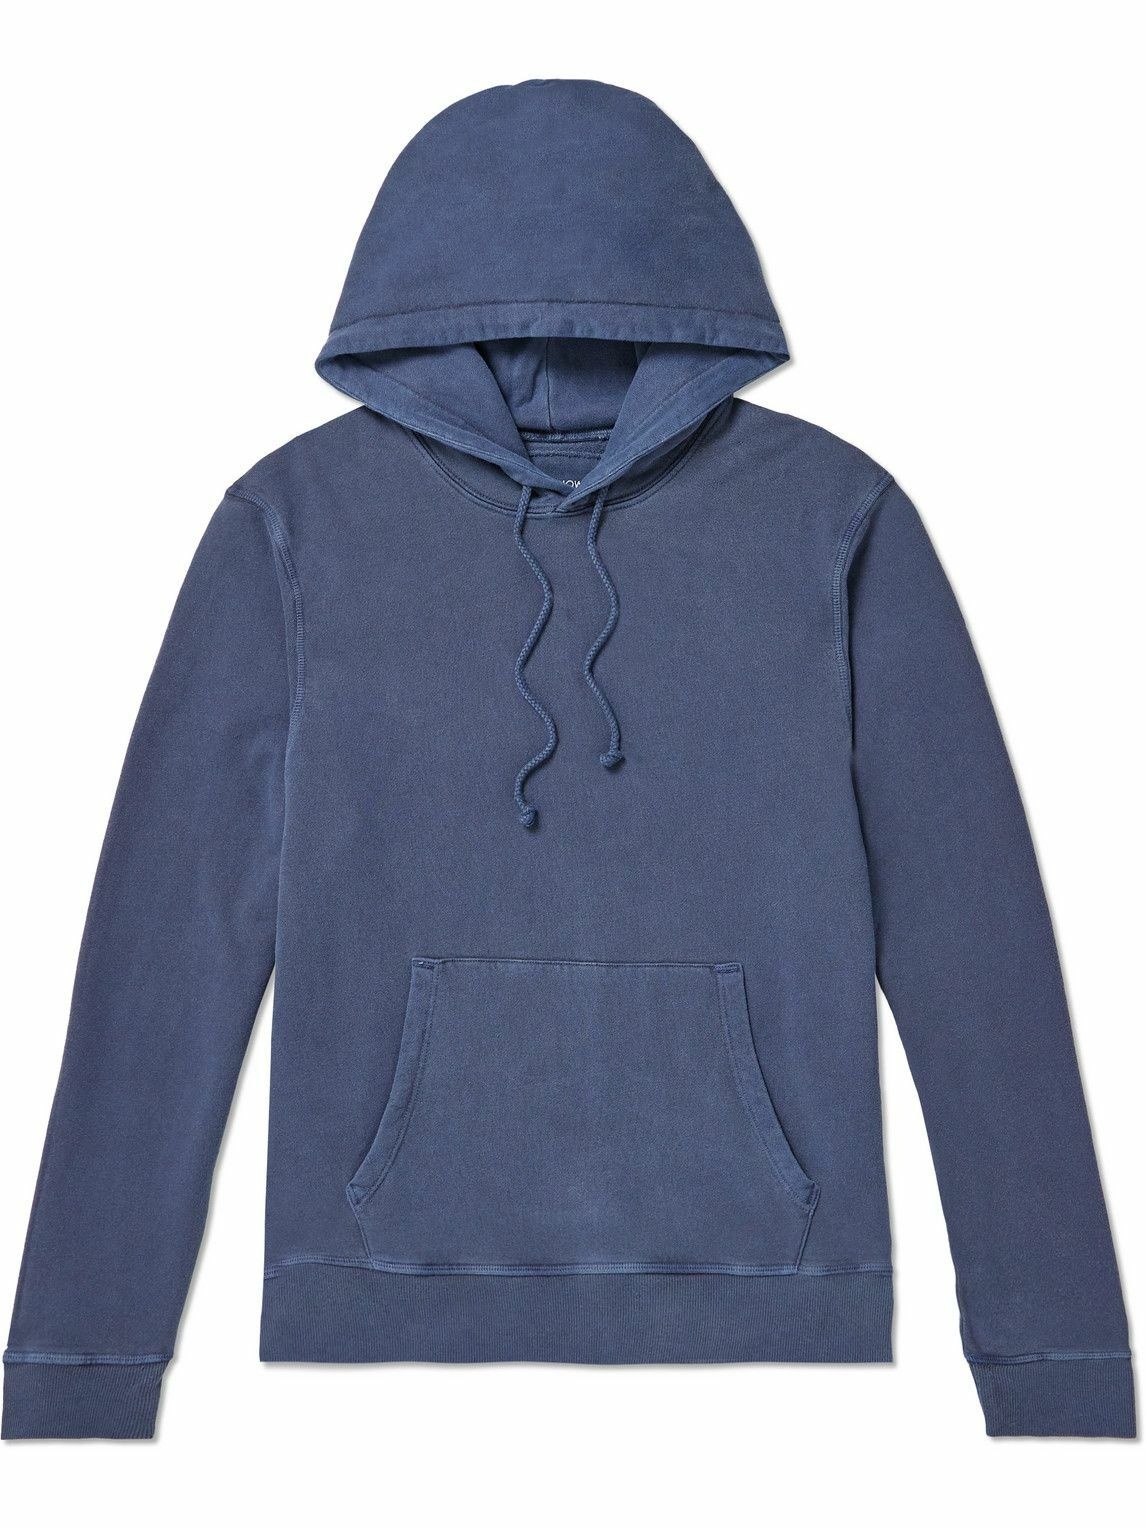 Outerknown - California Cotton-Jersey Hoodie - Blue Outerknown